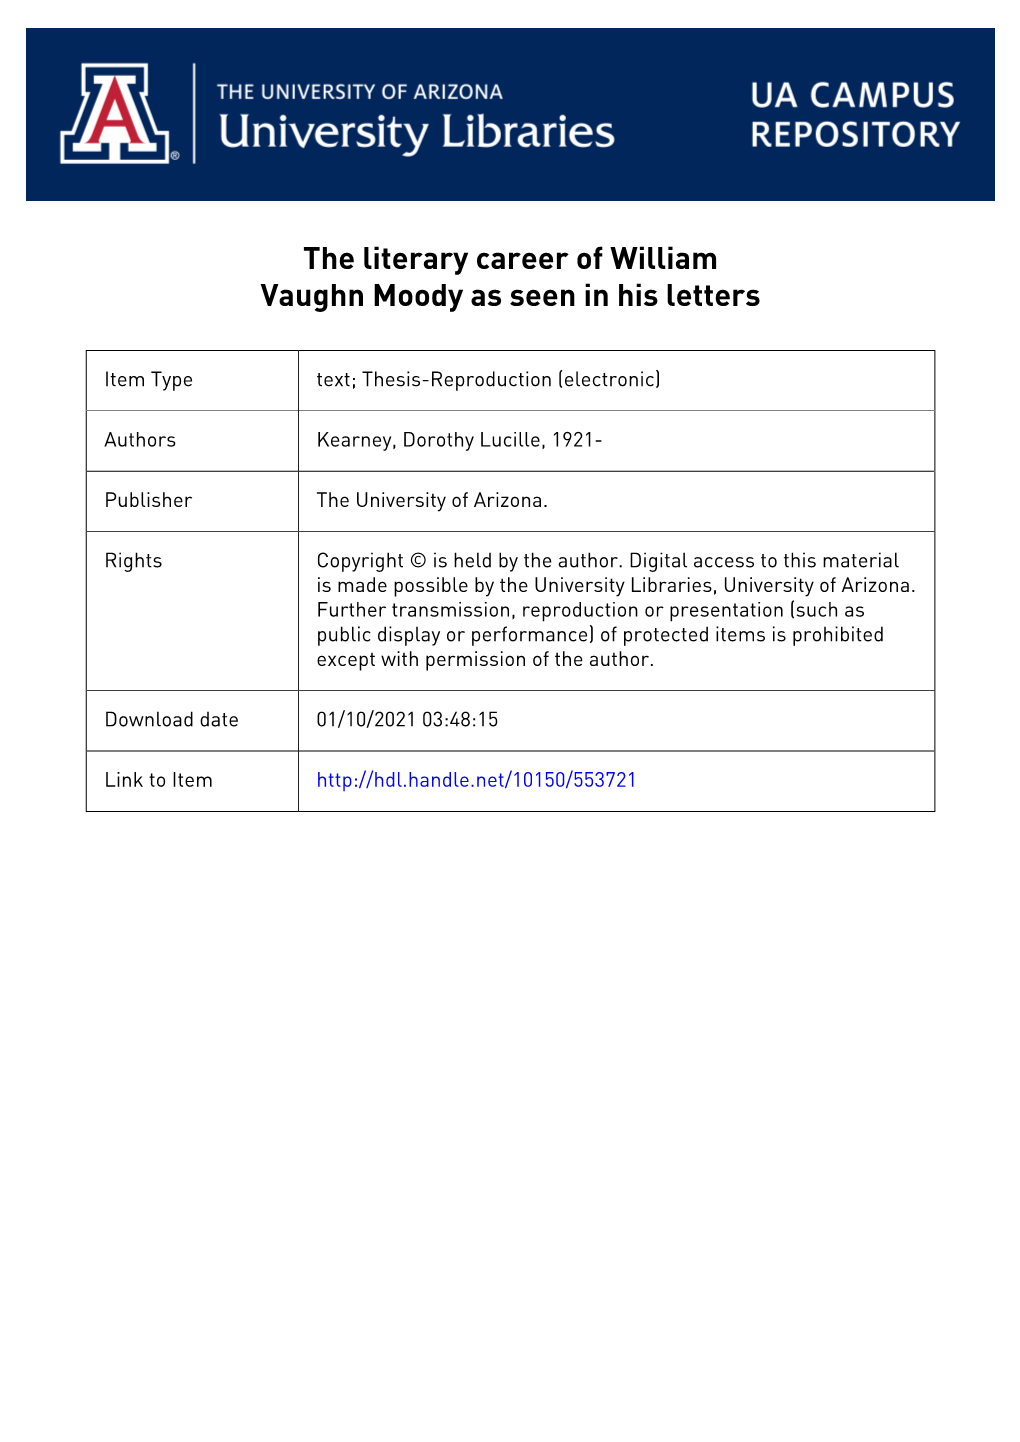 The Literary Career of William Vaughn Moody As Seen in His Letters